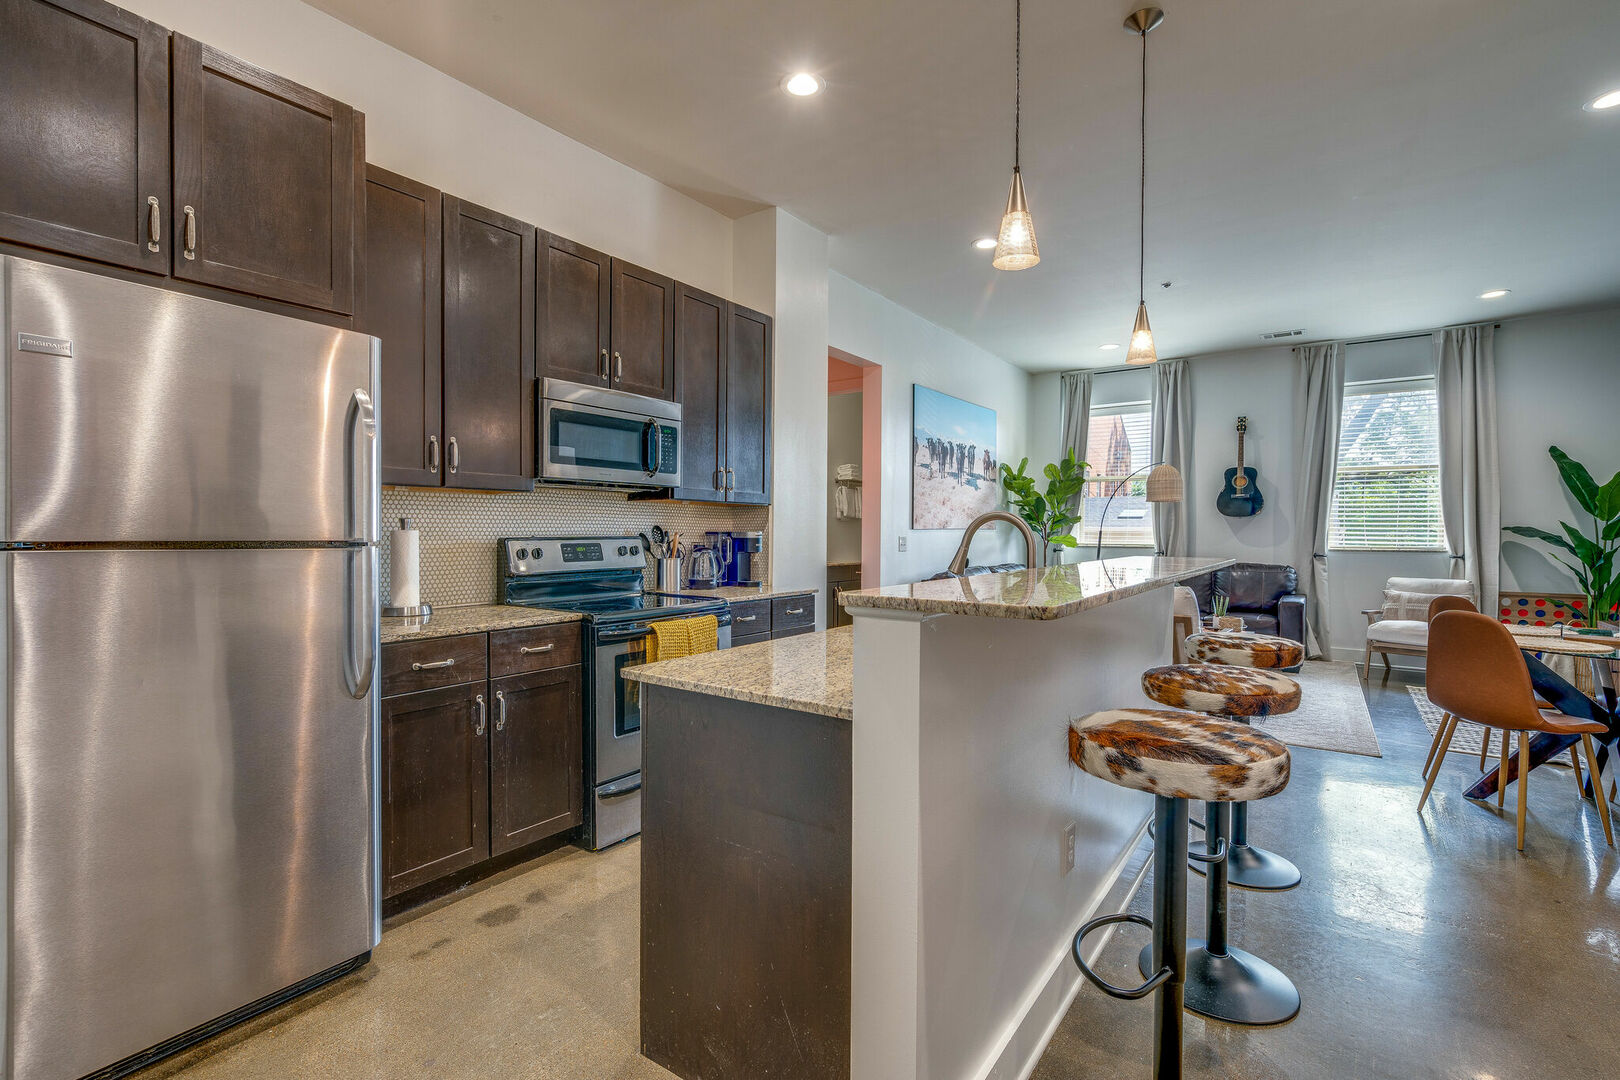 Fully stocked kitchen with your basic cooking essentials and complete with stainless steel appliances.